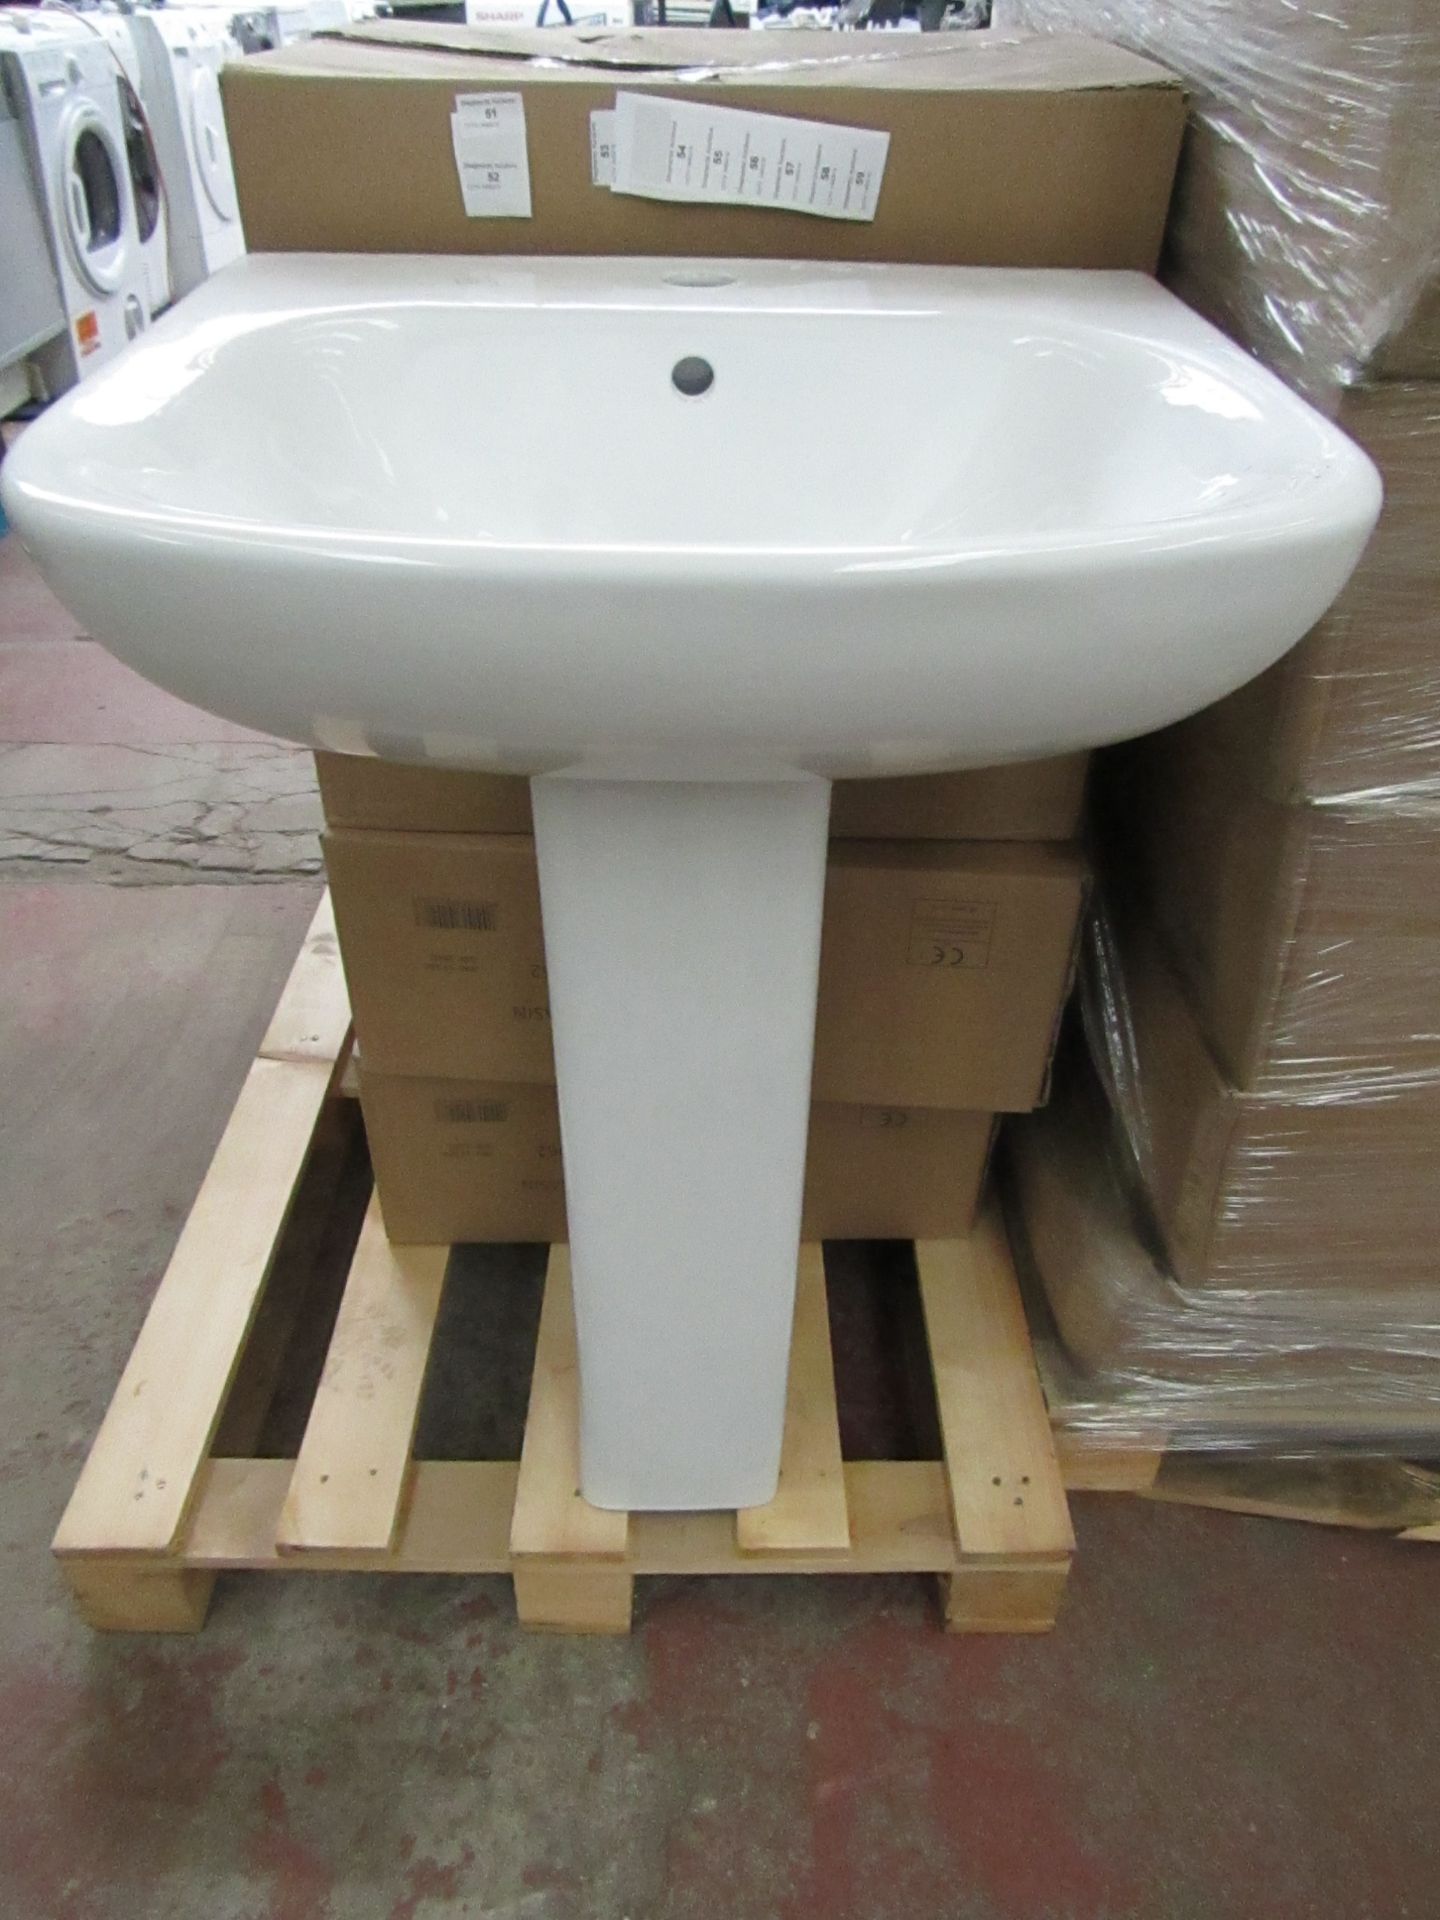 Seattle 540mm sink with a Albany/Solene full pedestal, the pedestal is the same as the seattle